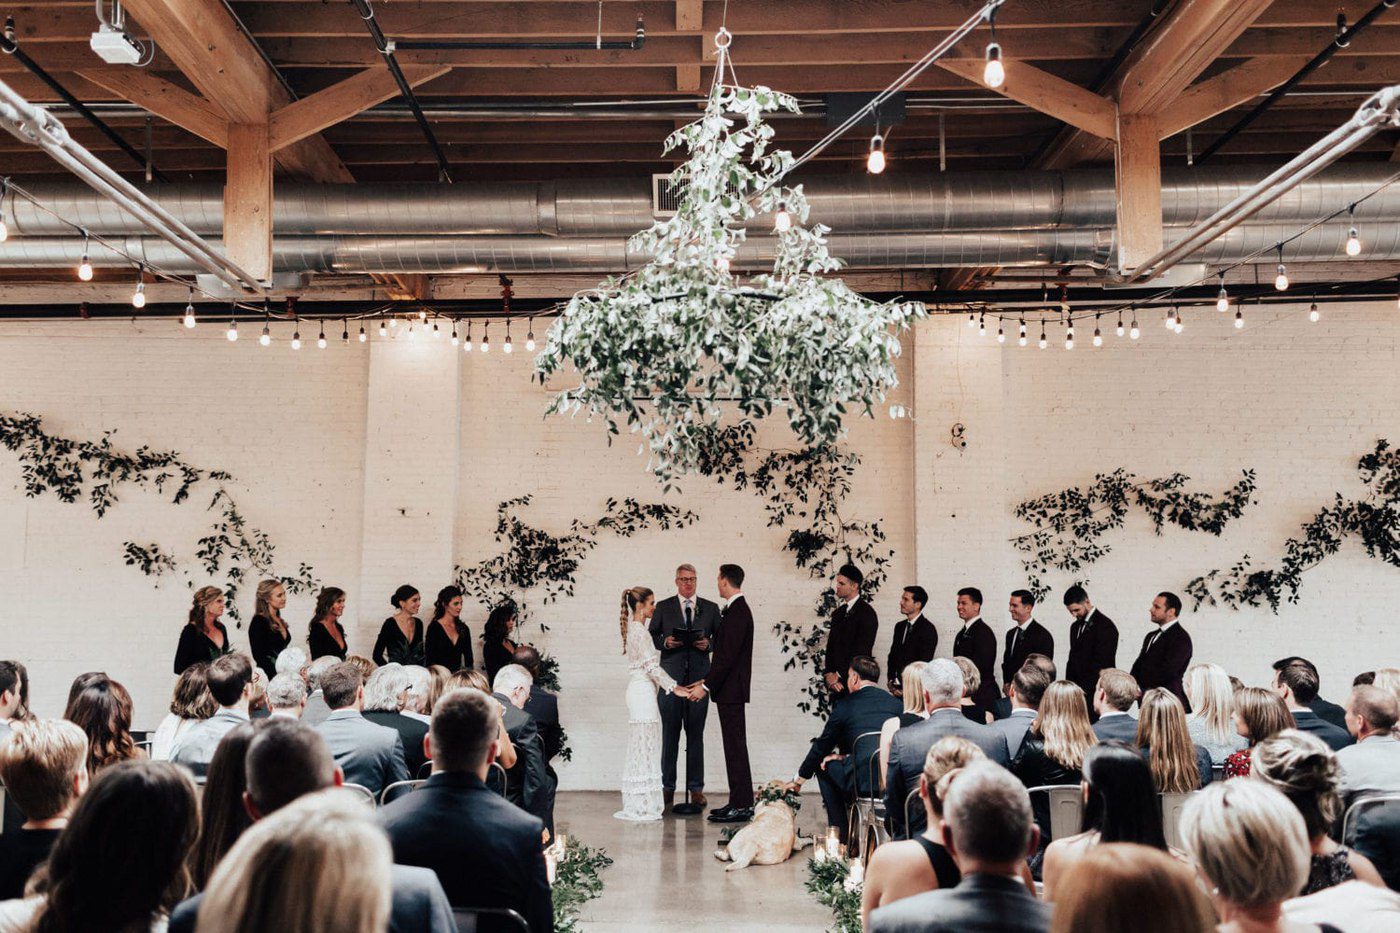 Love at First SKYLIGHT | 10 Factors to Consider When Booking a Wedding Venue